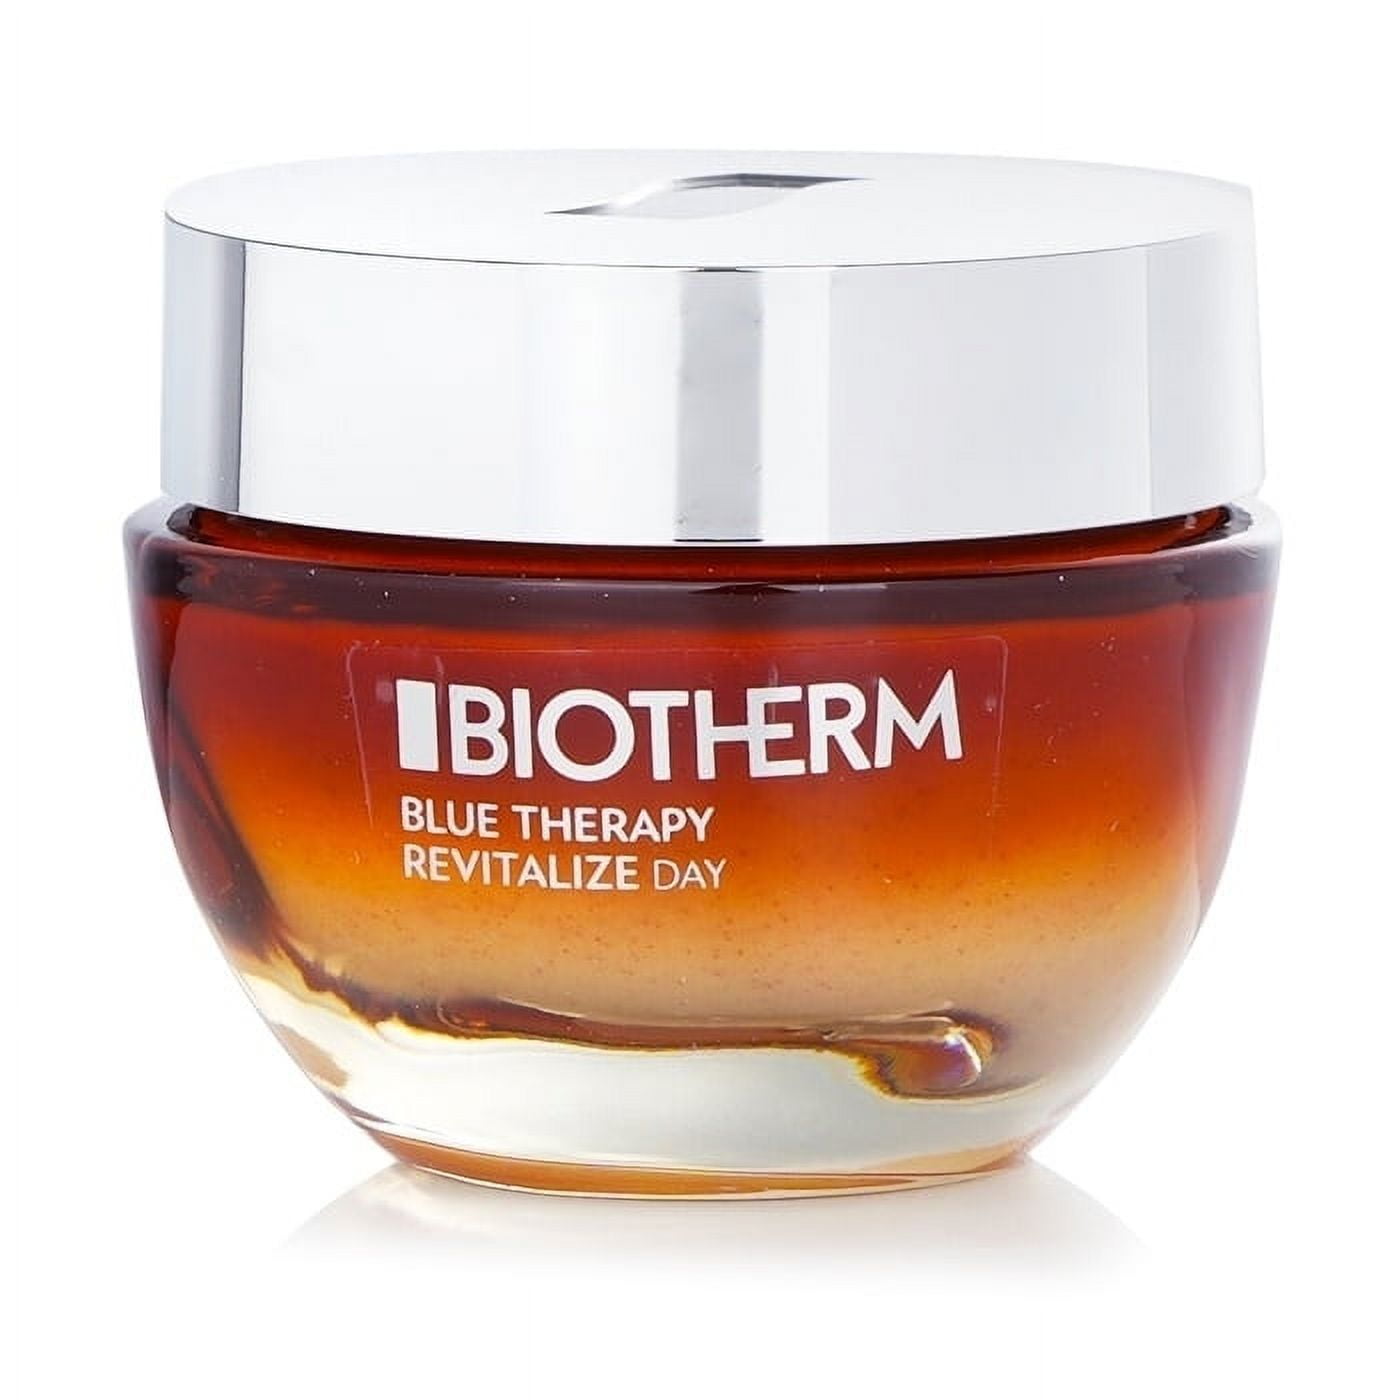 Day 50ml/1.69oz Algae Revitalizing Revitalize Intensely Amber Cream Blue Therapy Biotherm